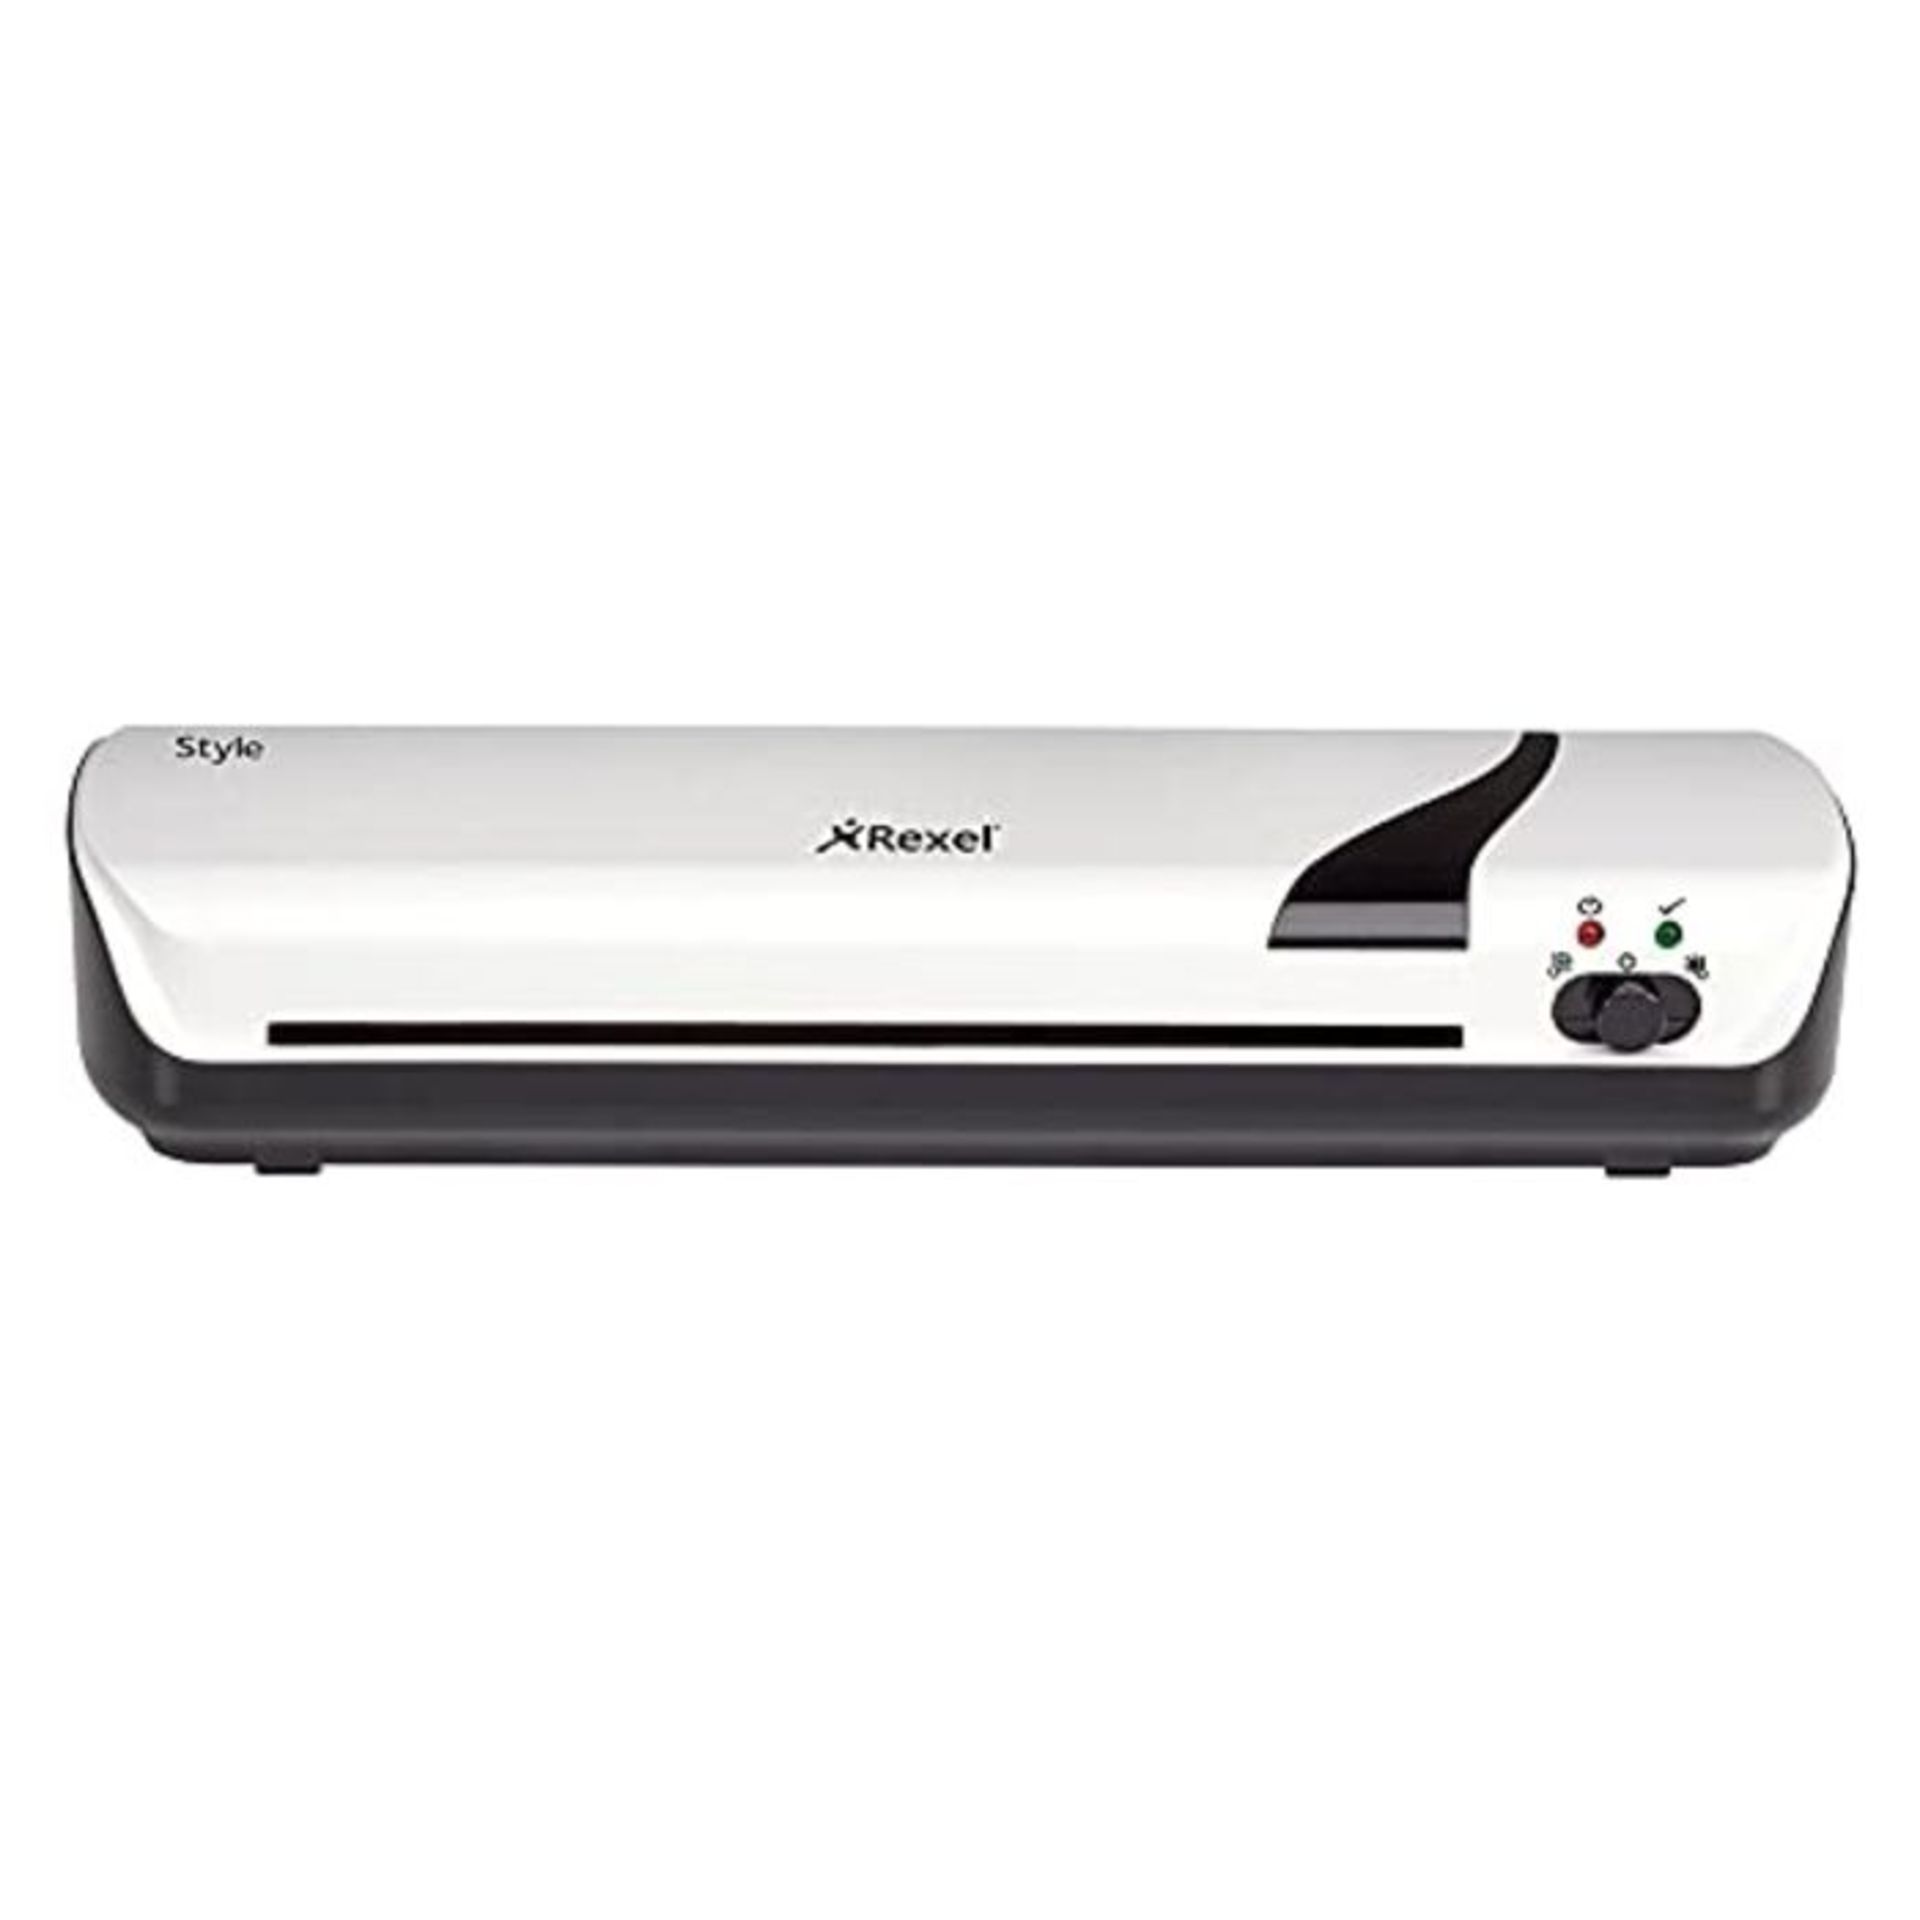 Rexel Style A4 home and office laminator, White, 2104511